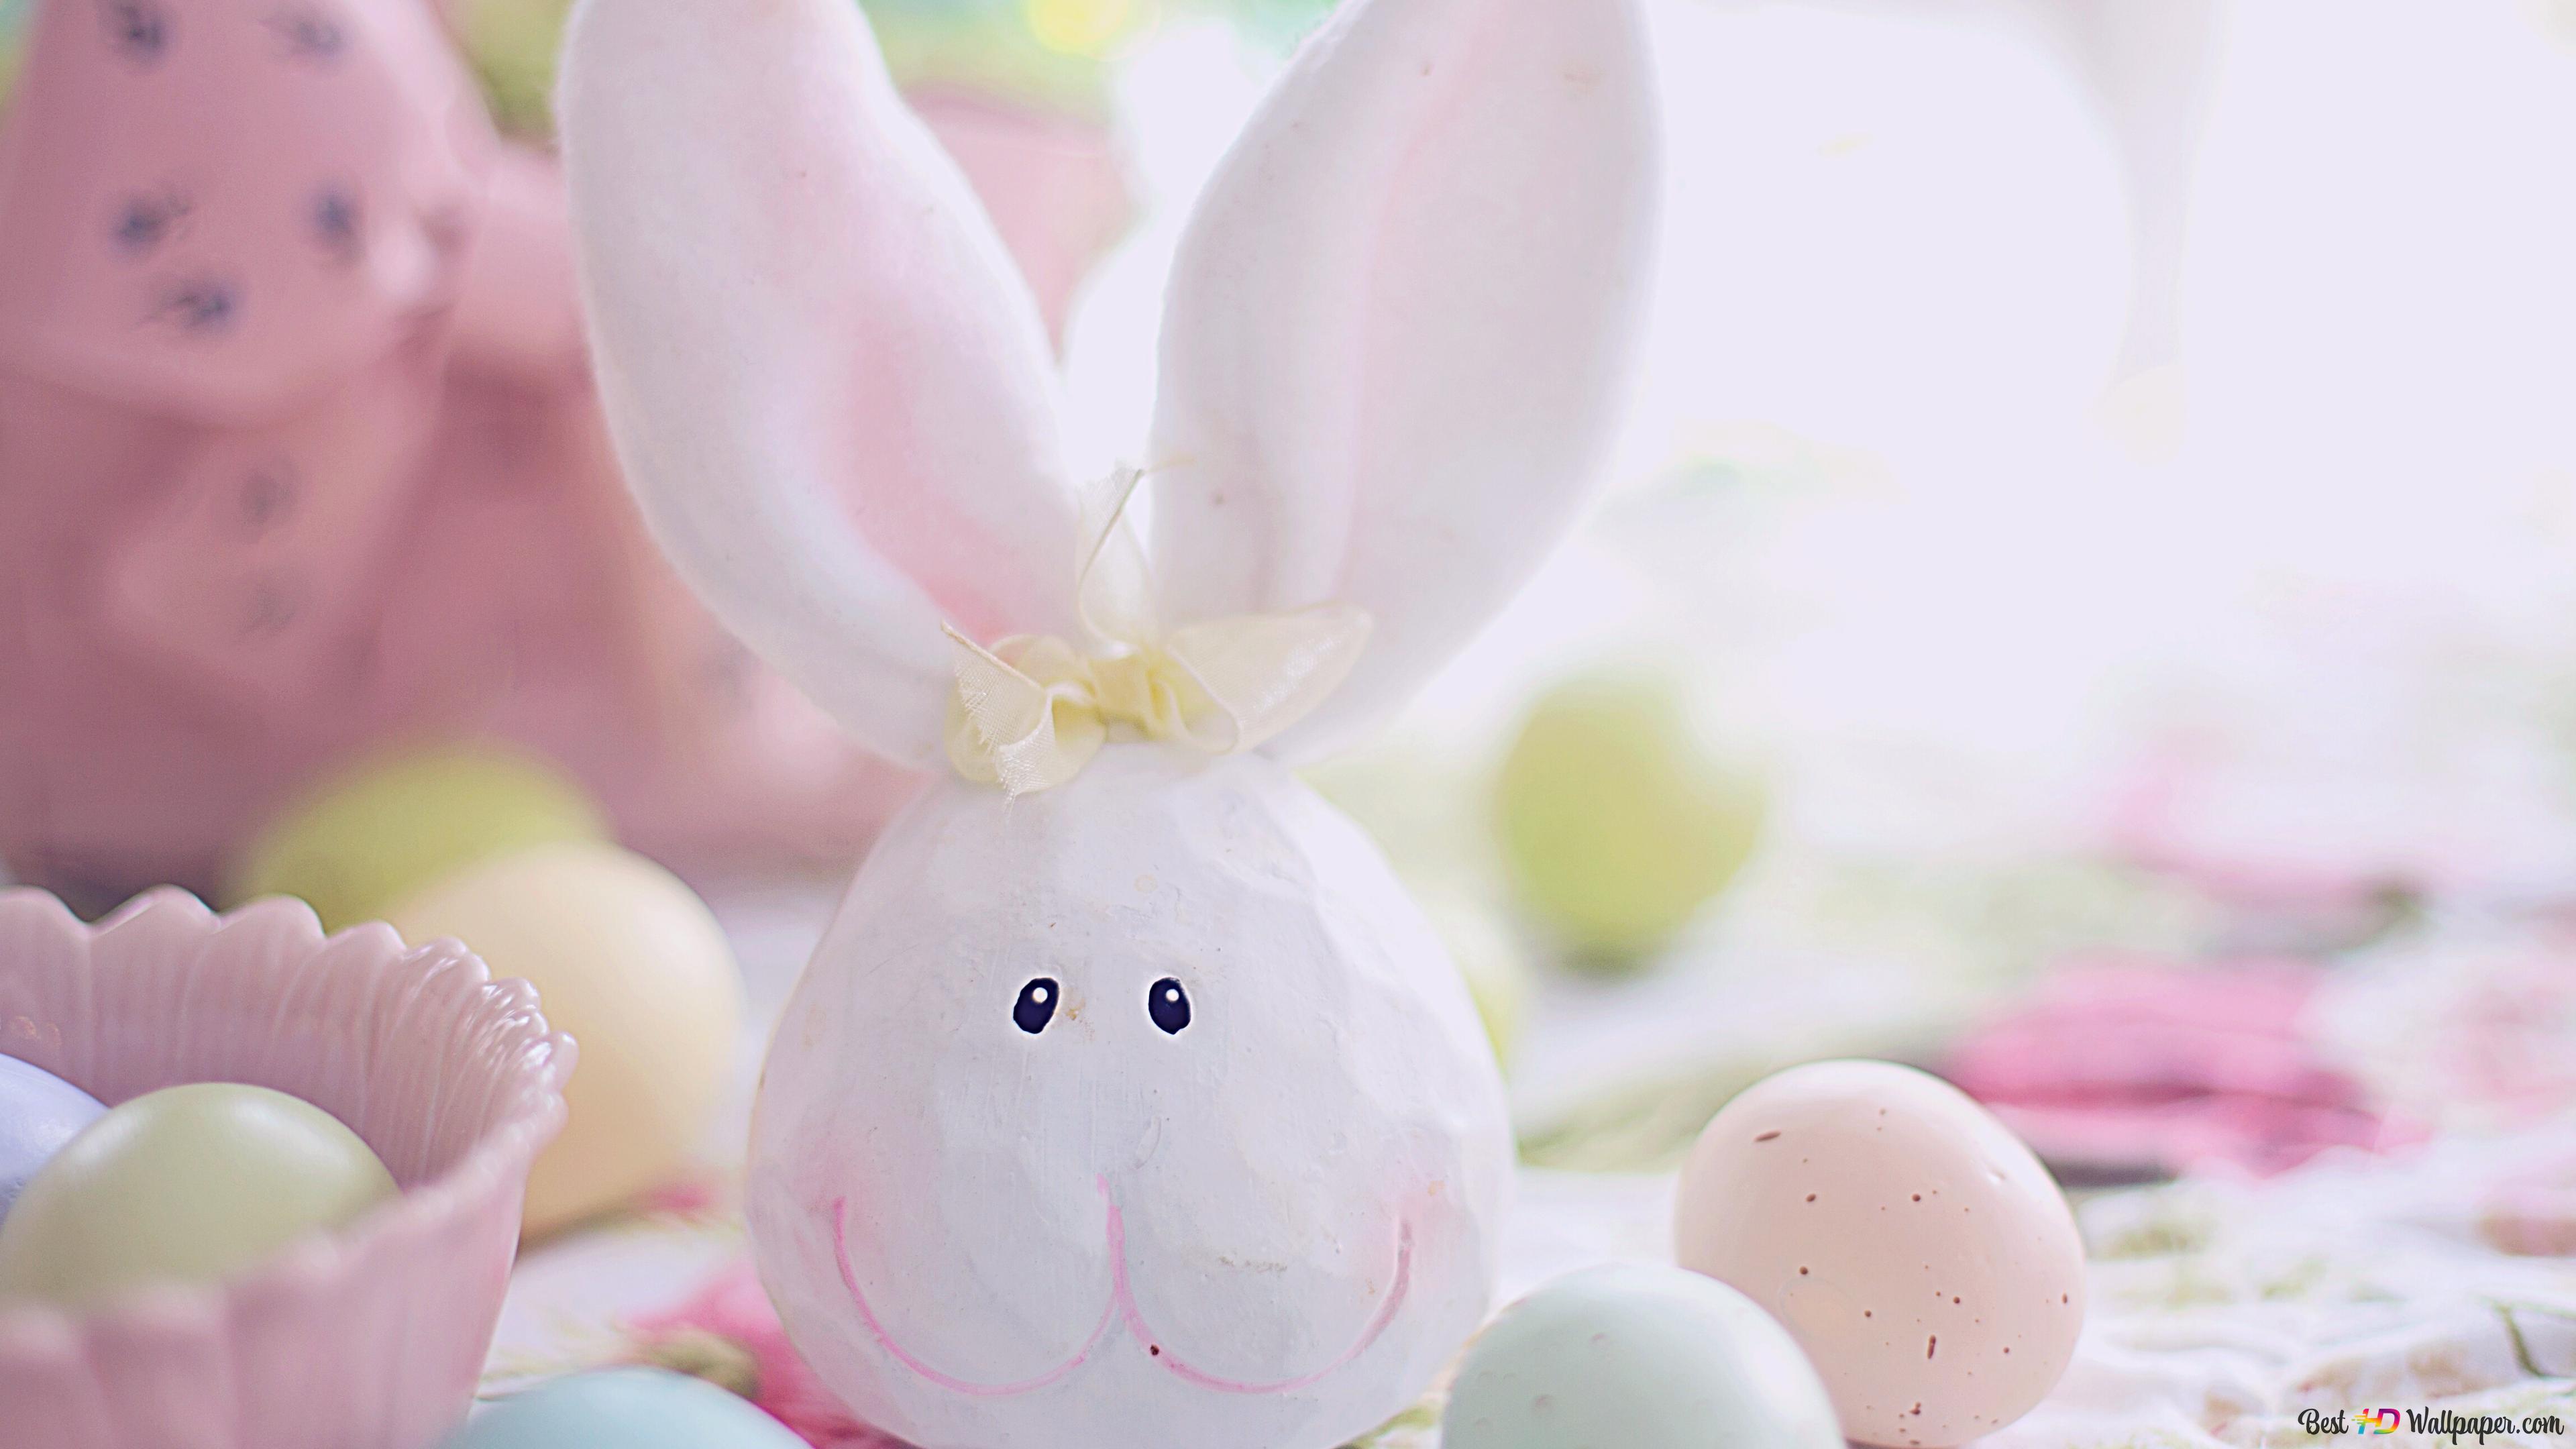 Aesthetic Eggs and bunny 4K wallpaper download